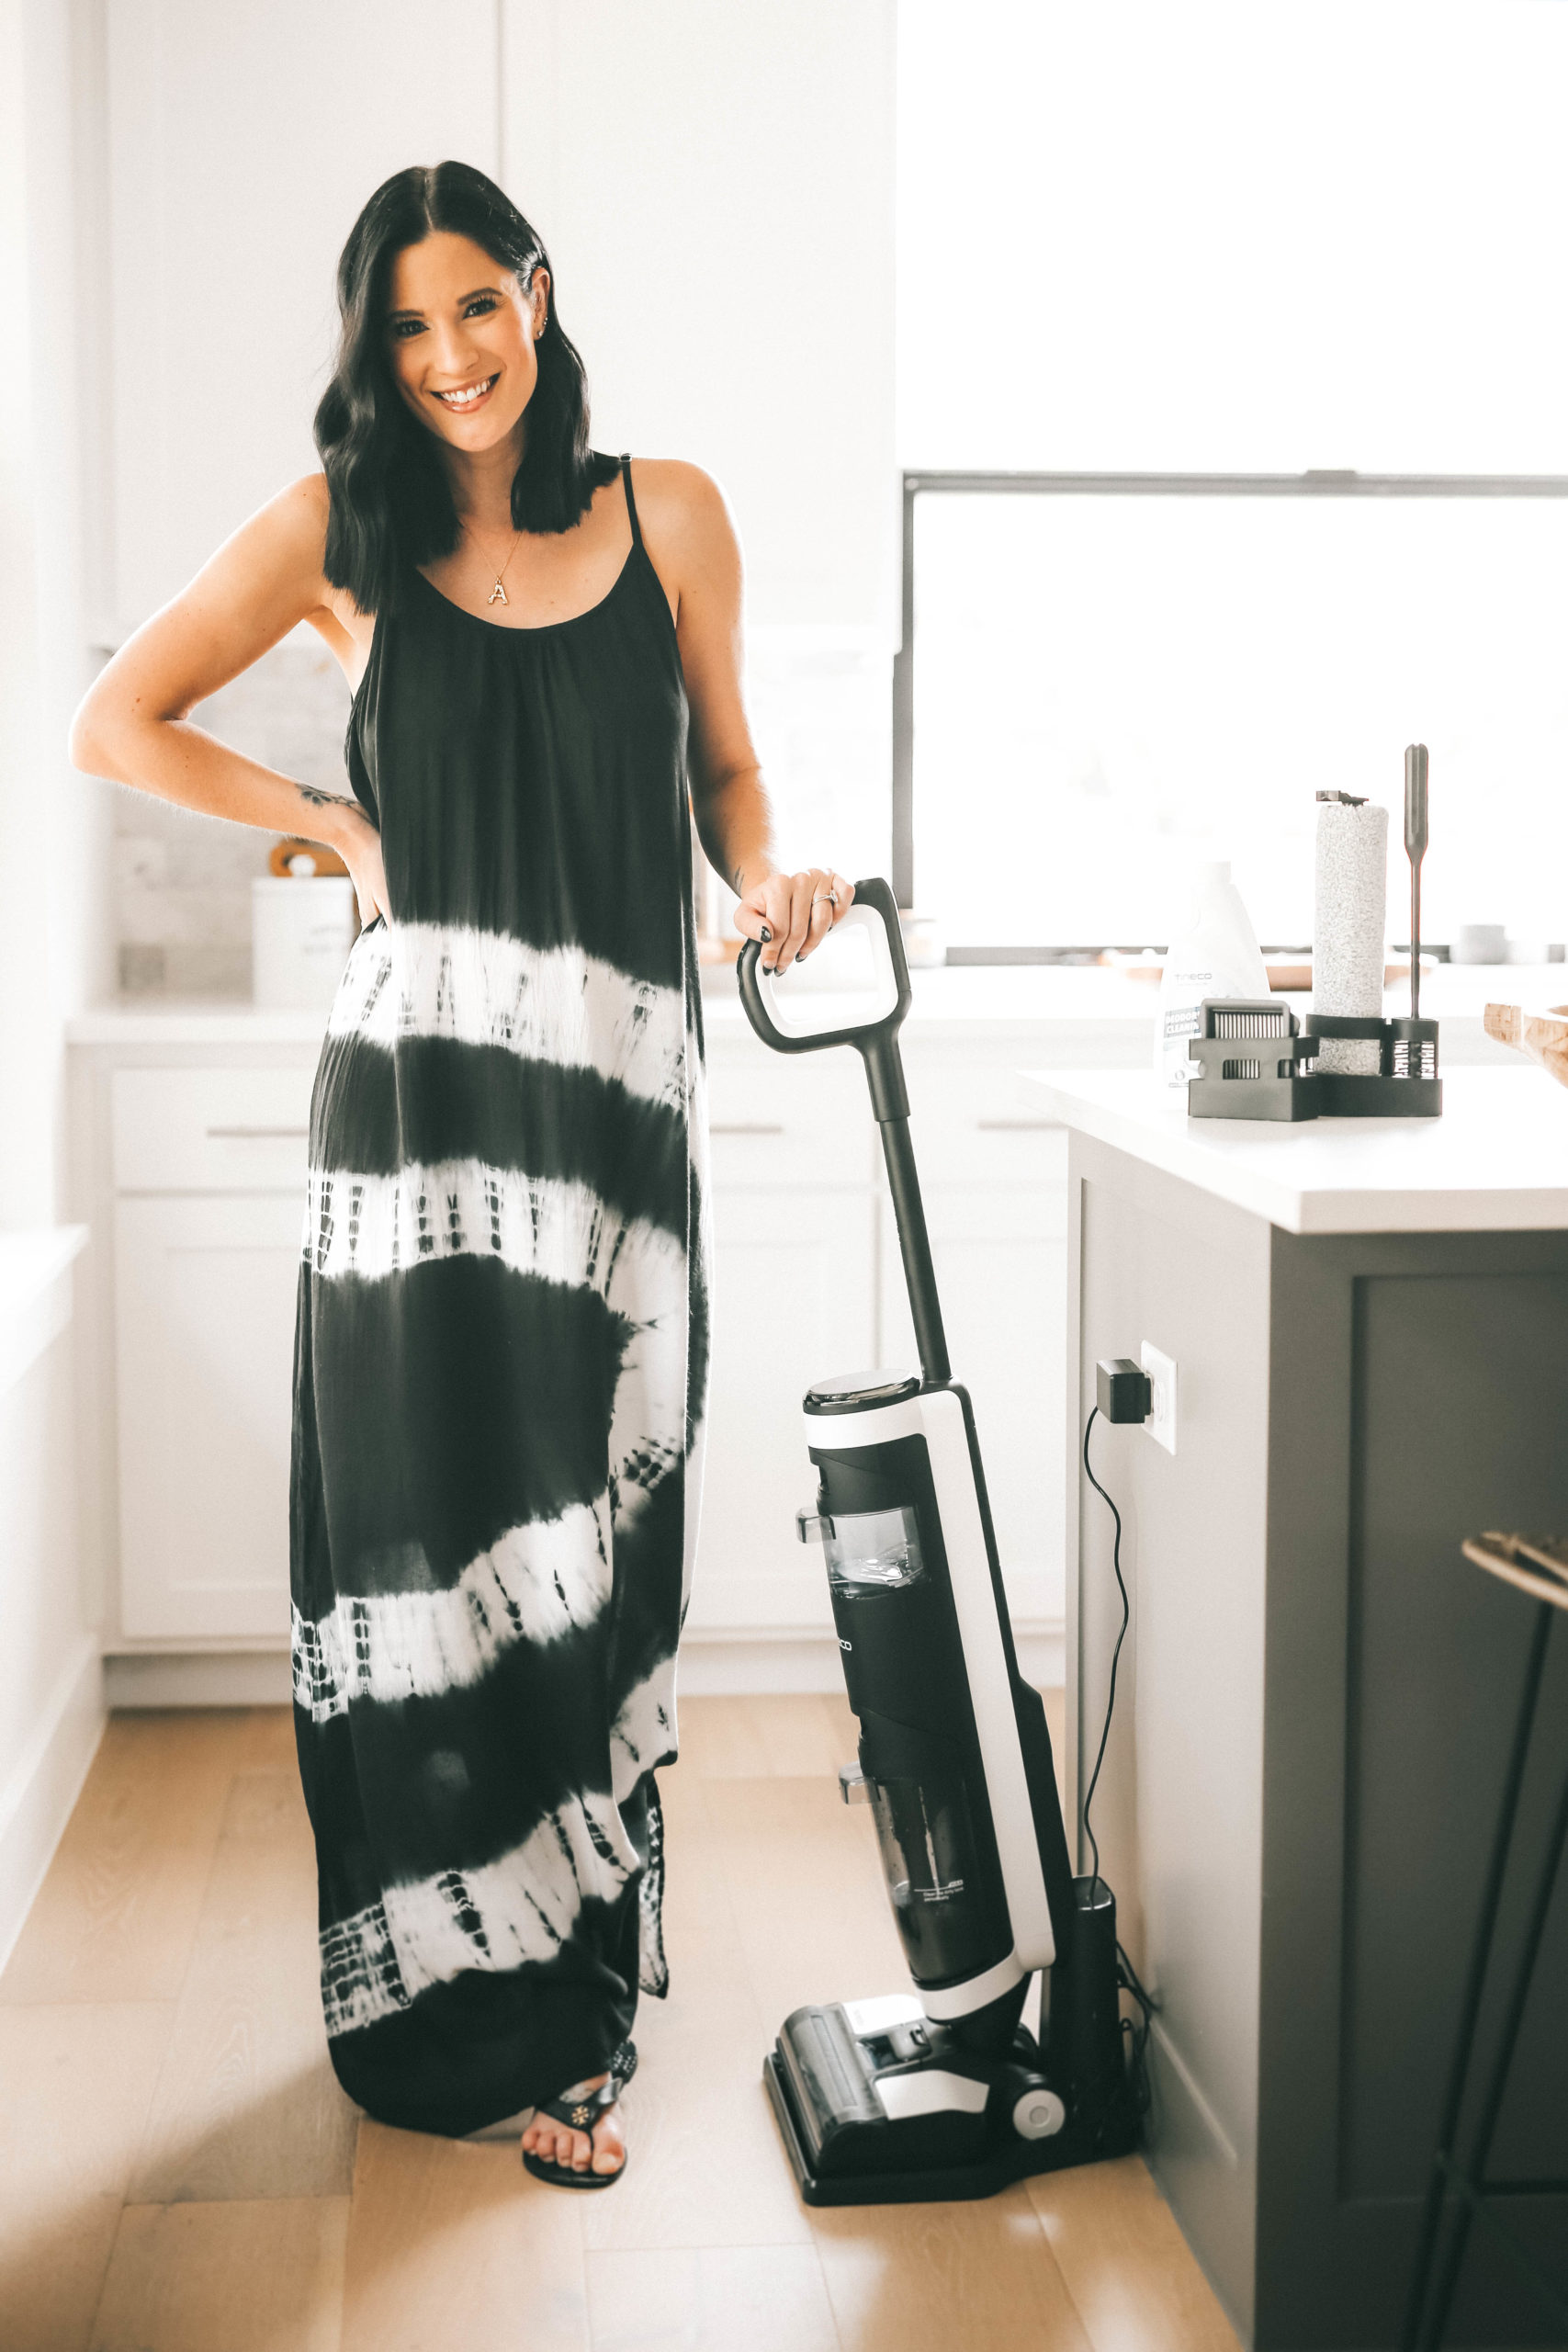 Tineco Floor One S3 by popular Austin lifestyle blog, Dressed to Kill: image of a woman wearing a black and white tie dye maxi and standing in her kitchen next to a Tineco Floor One S3 vacuum.